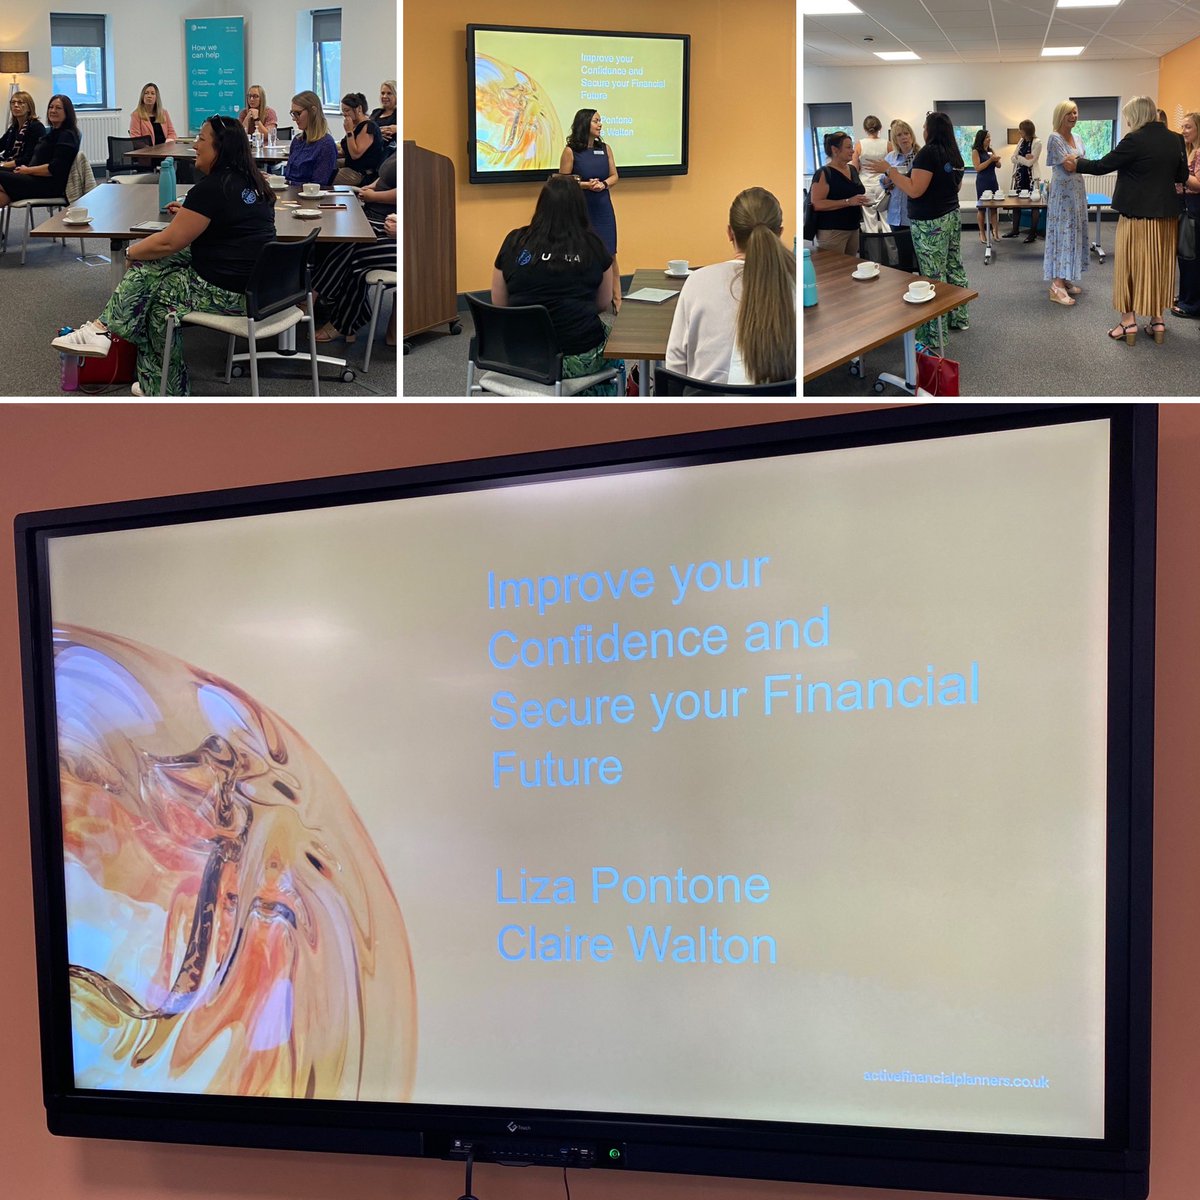 It’s a full house this morning as we welcome back friends old and new 🙌🏻 Our @LizaPActive and Claire Walton @leadersaremad team up to share their exceptional knowledge, helping to ‘Improve your confidence and secure your financial future’ #TheClearAdvantage #FinancialPlanning